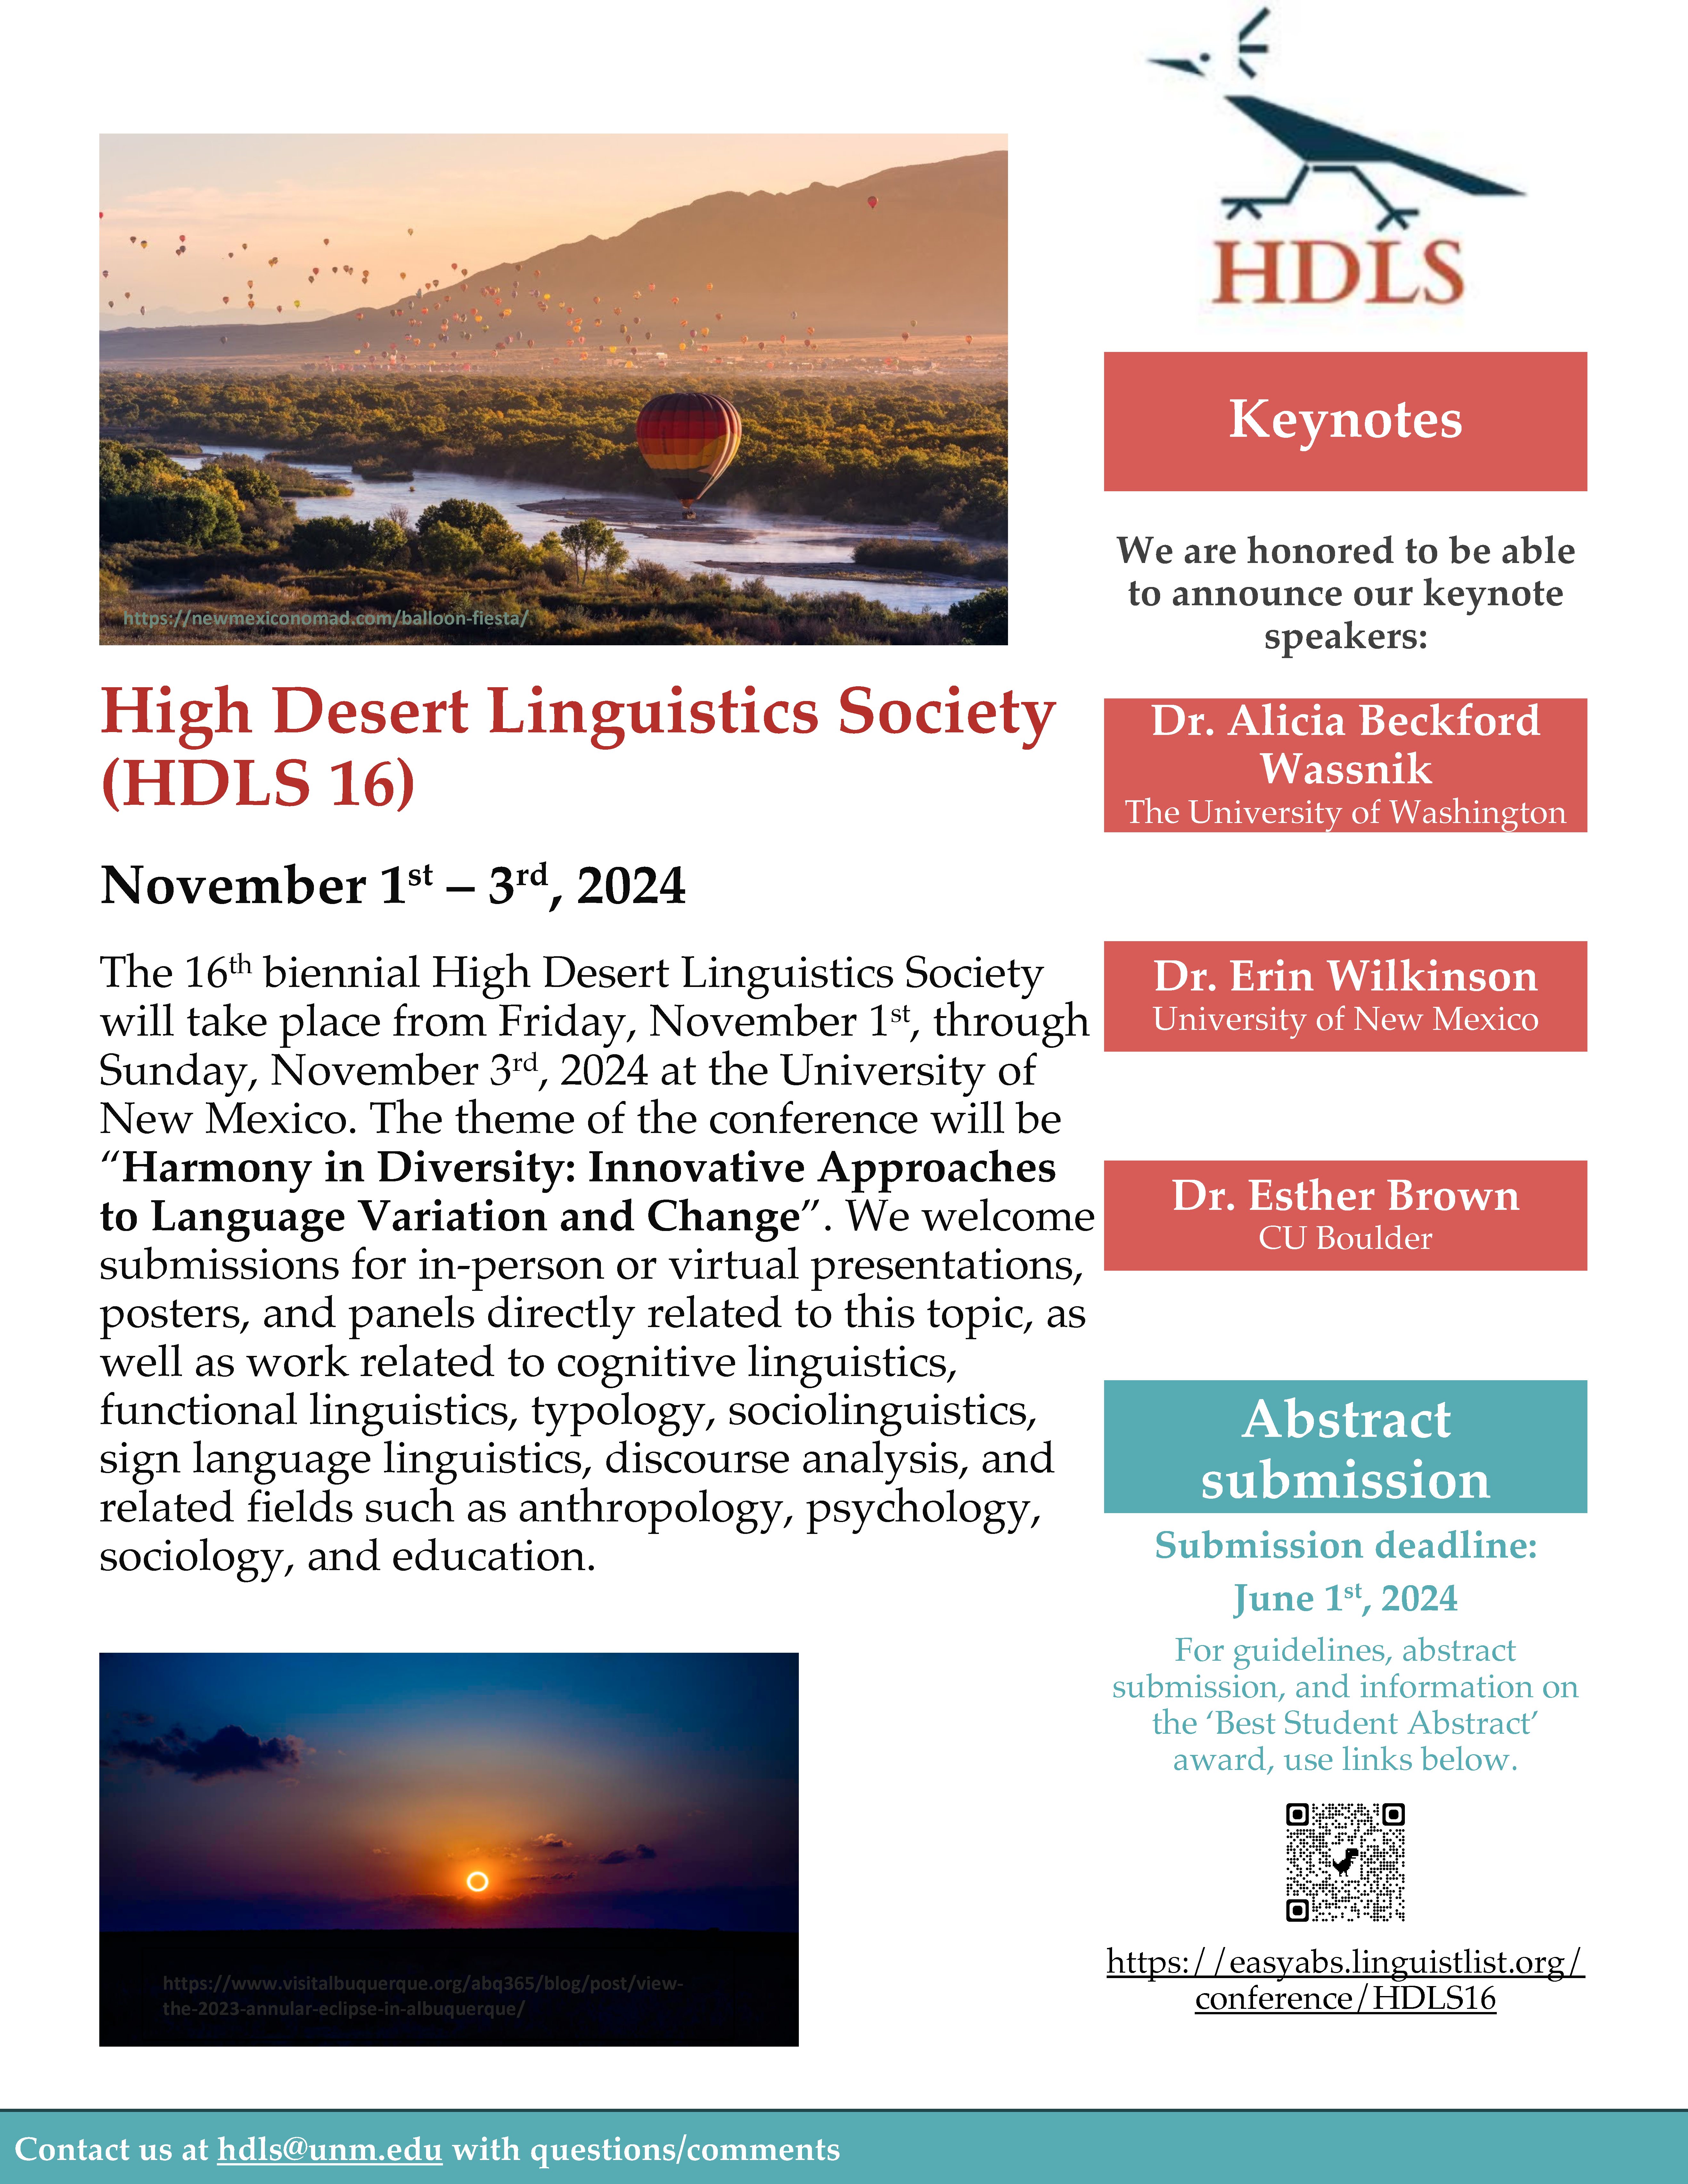 HDLS 16 Call for Papers